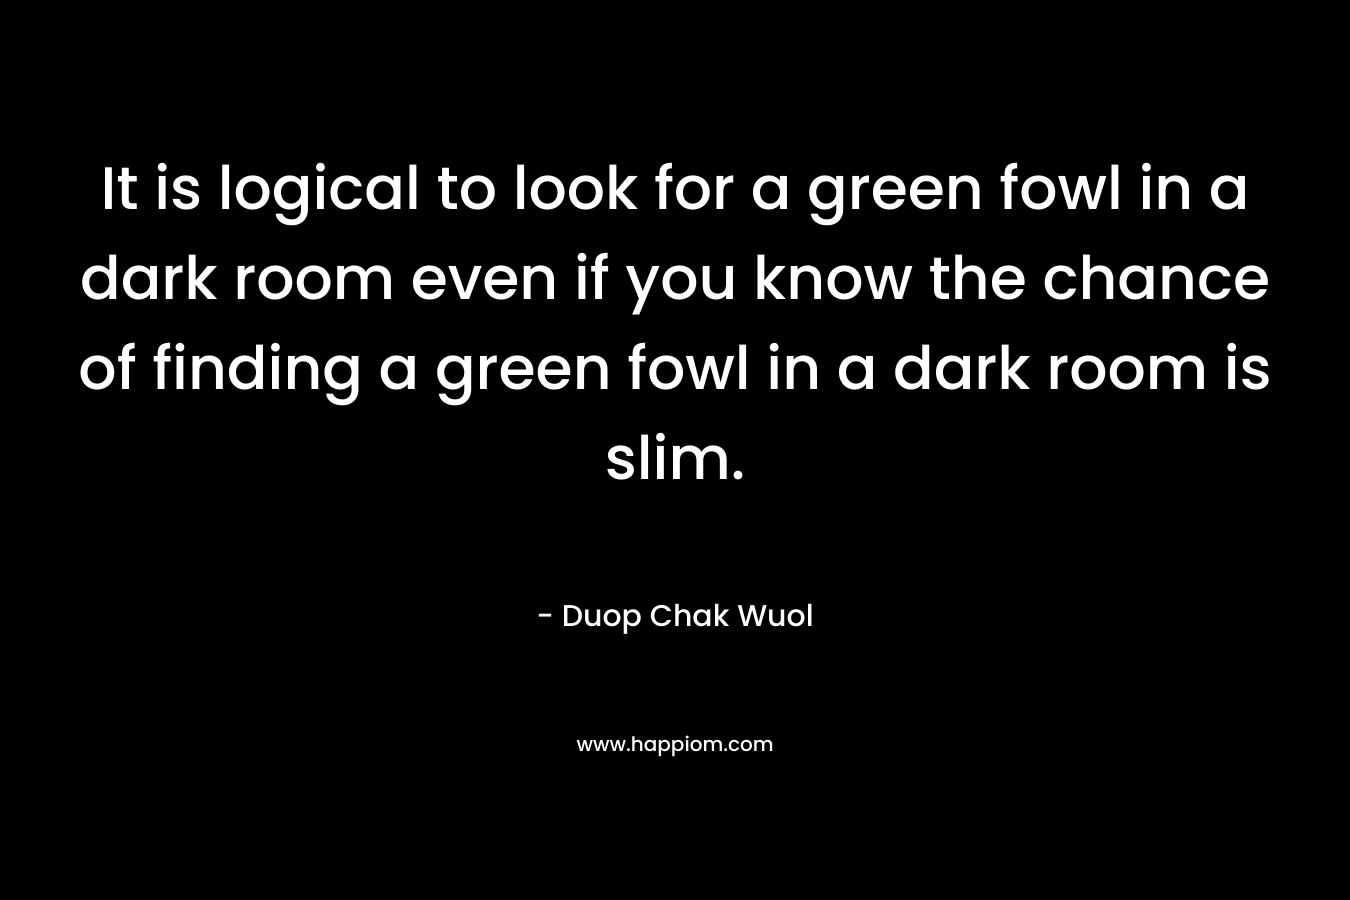 It is logical to look for a green fowl in a dark room even if you know the chance of finding a green fowl in a dark room is slim.